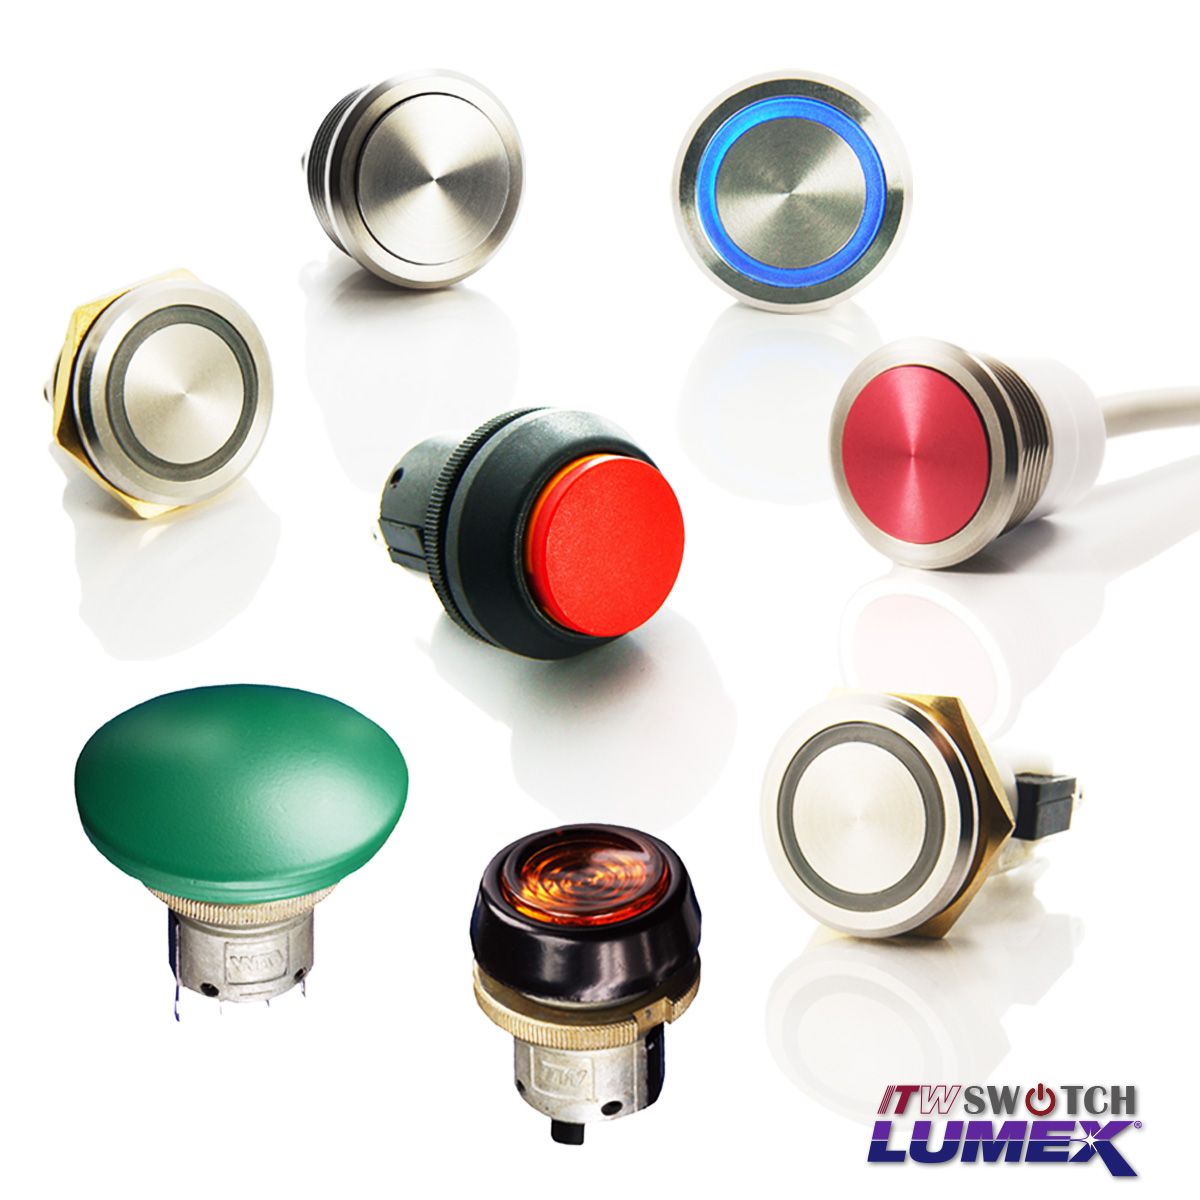 The 22mm panel cutout push button switches from ITW Lumex Switch are available in a diverse selection of designs.